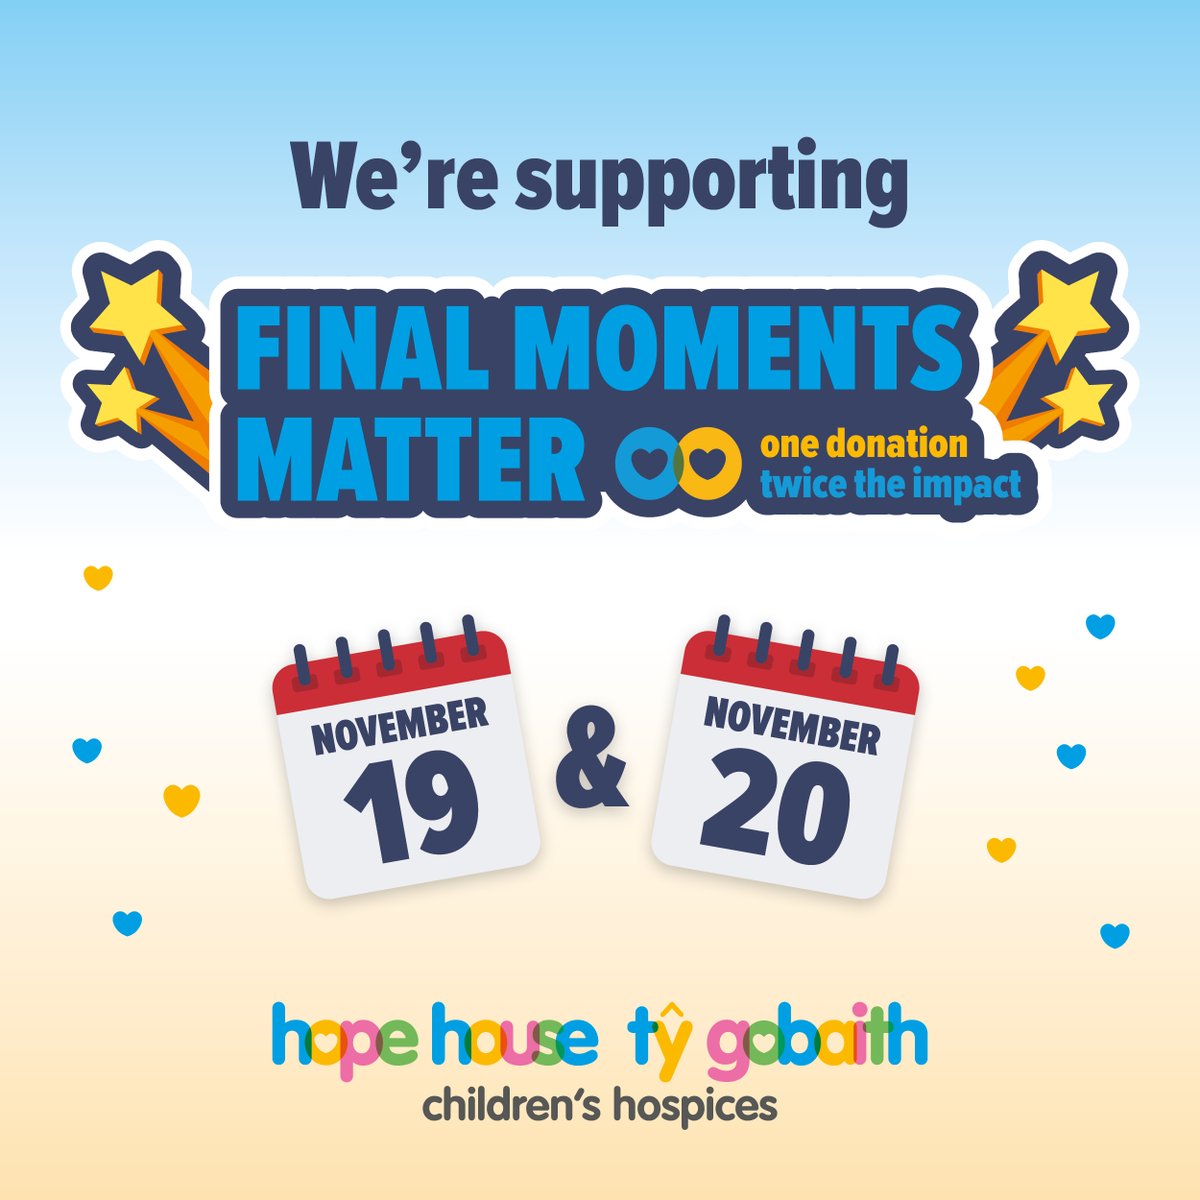 We’re supporting @HHTGhospices - Tomorrow marks the start of a 36hour #fundraising marathon to help fund a year of vital end of life care for seriously ill local children. Every donation made will be doubled! Please click to help bit.ly/40H3Phw
#Wales #MakeADifference